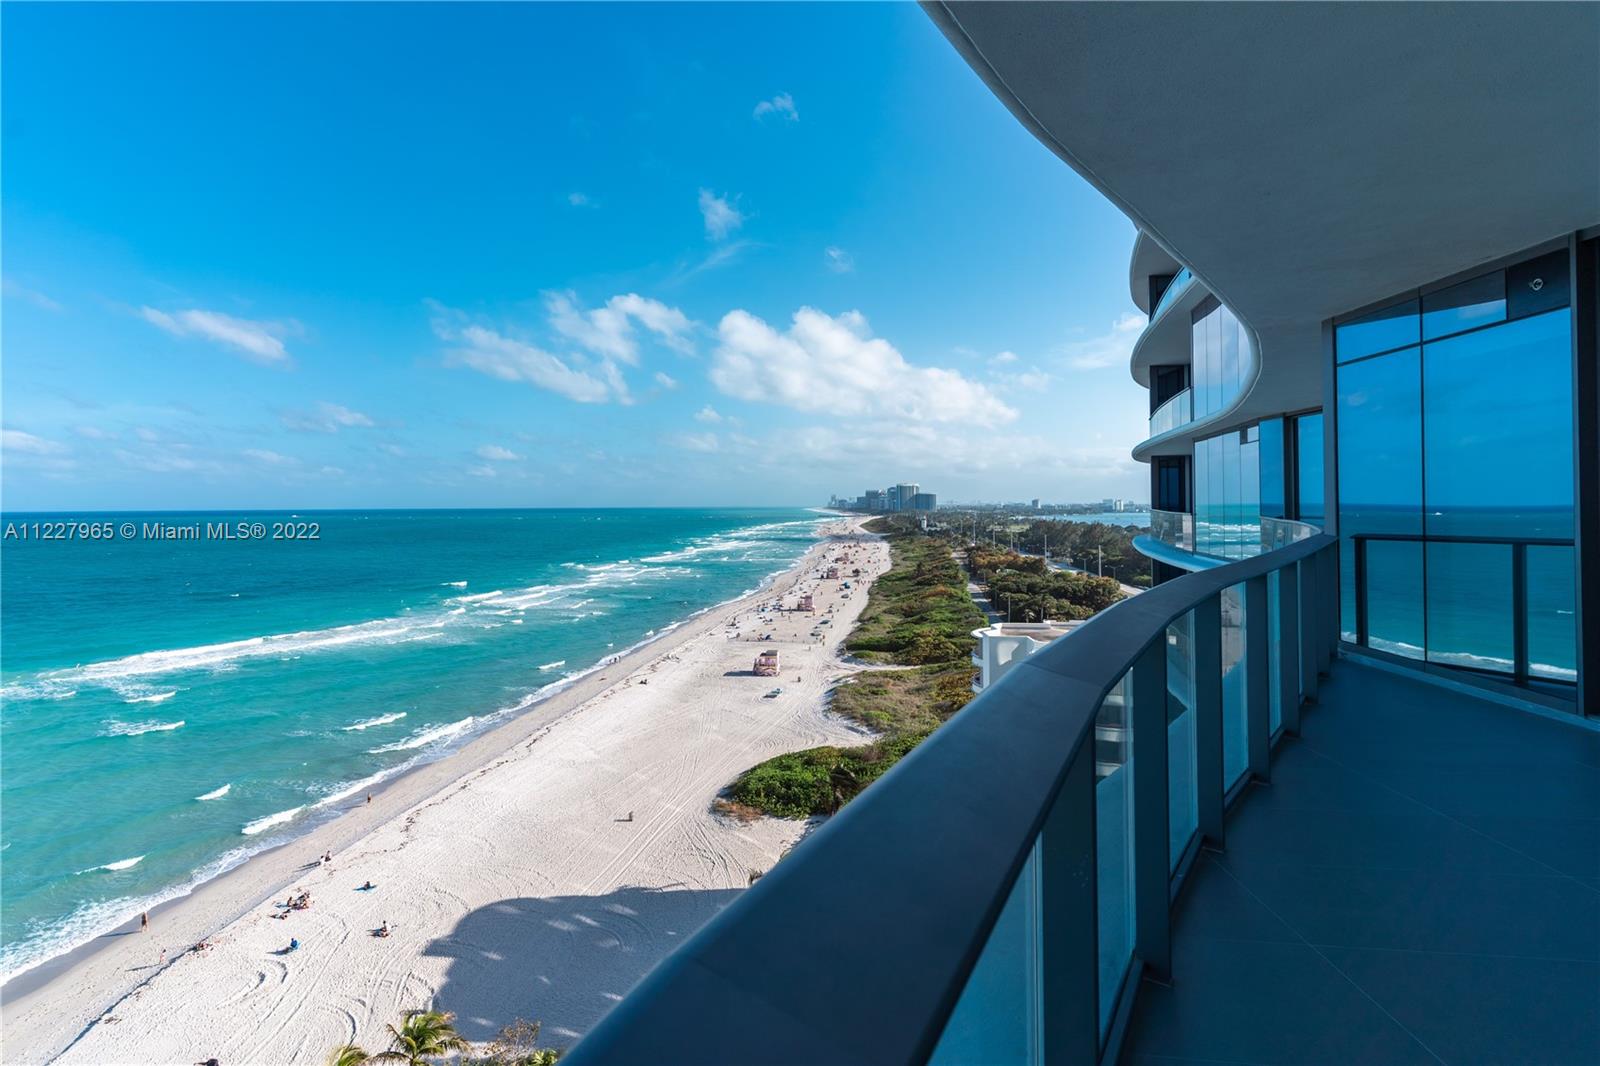 Outstanding beachfront condo in the newest Ritz-Carlton Residences in Sunny Isles Beach. This ample 3-bed + Den luxury condo features a spacious flow-thru floorplan with East
& West views, enjoy the best of both worlds with unobstructed ocean views as well as scenic Intracoastal & Miami’s skyline views. A private elevator takes you to almost 2500 SF of
living area with 10ft ceilings, an Italian-designed kitchen fully equipped with Gaggenau appliances, Caesarstone quartz countertop, wine cooler, built-in cappuccino maker, etc.
Exceptional amenities include a 24hr Concierge valet, gym & Spa, sunrise & Sunset pools, 250 linear ft. of private beach, restaurant & beach garden, kid’s club, and a breathtaking
33rd floor Club level. Tenant occupied until May 2023.